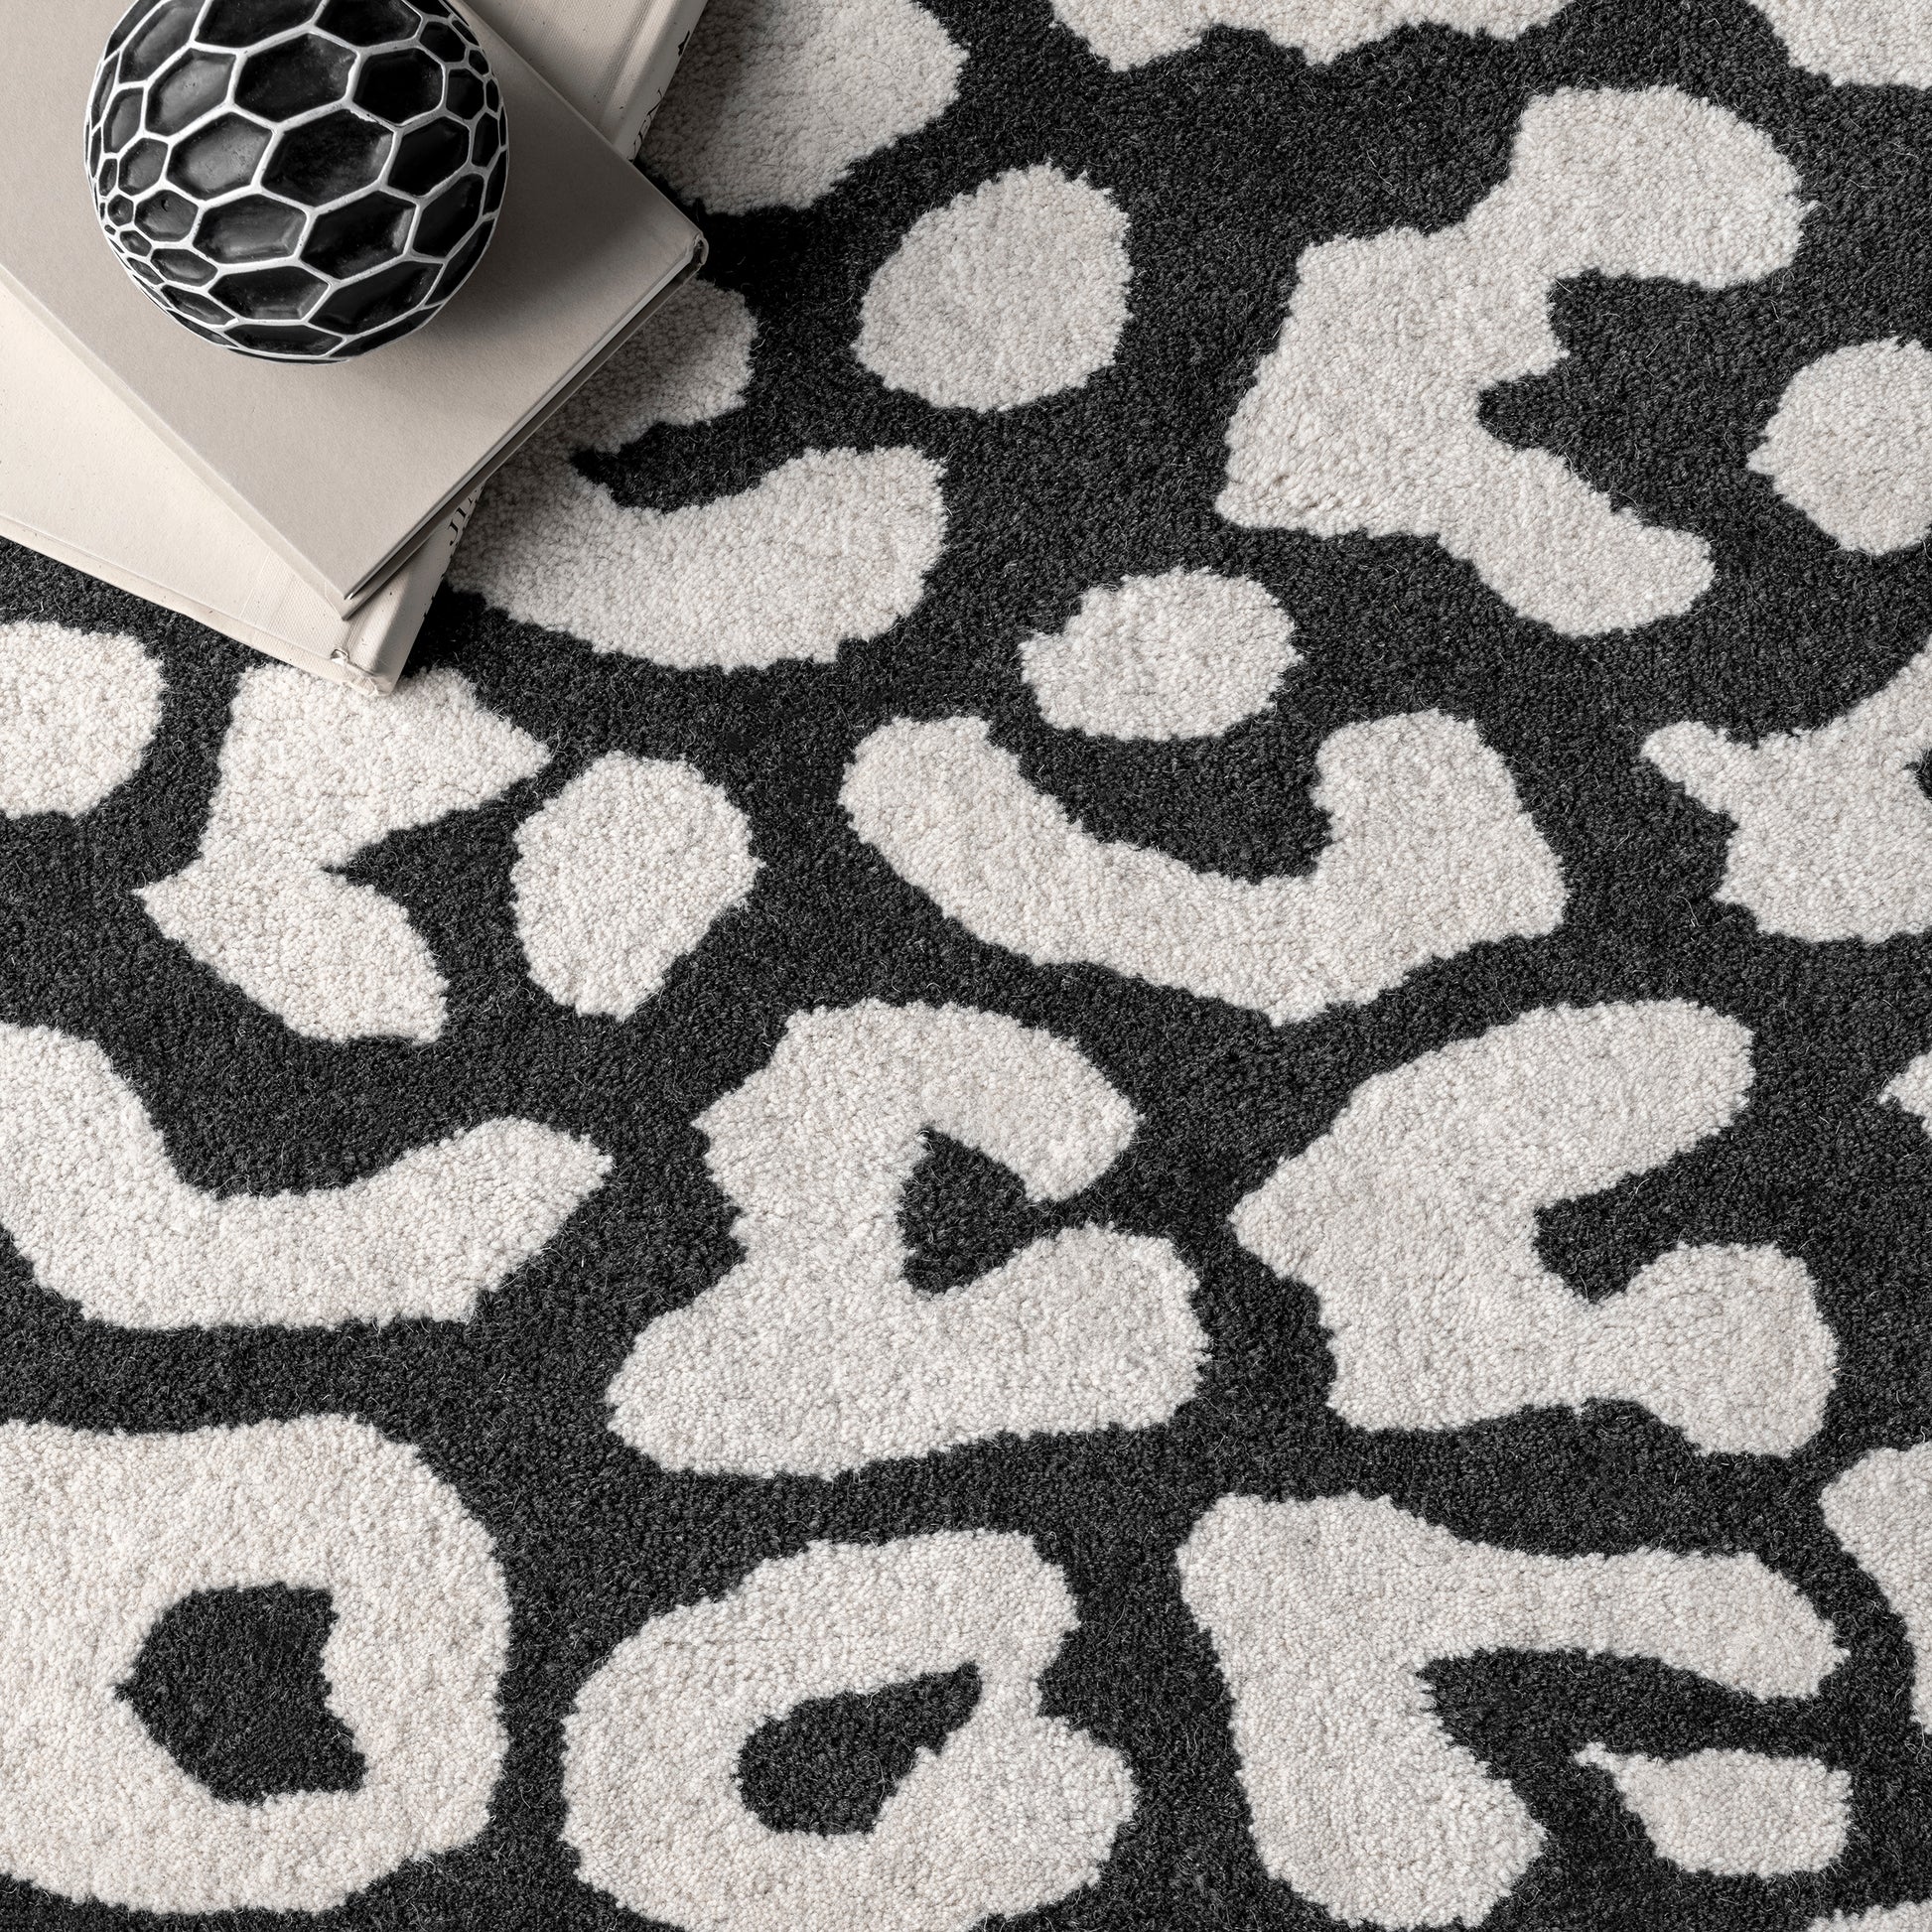 Nuloom Rorie Leopard Print Nro2683A Black Area Rug